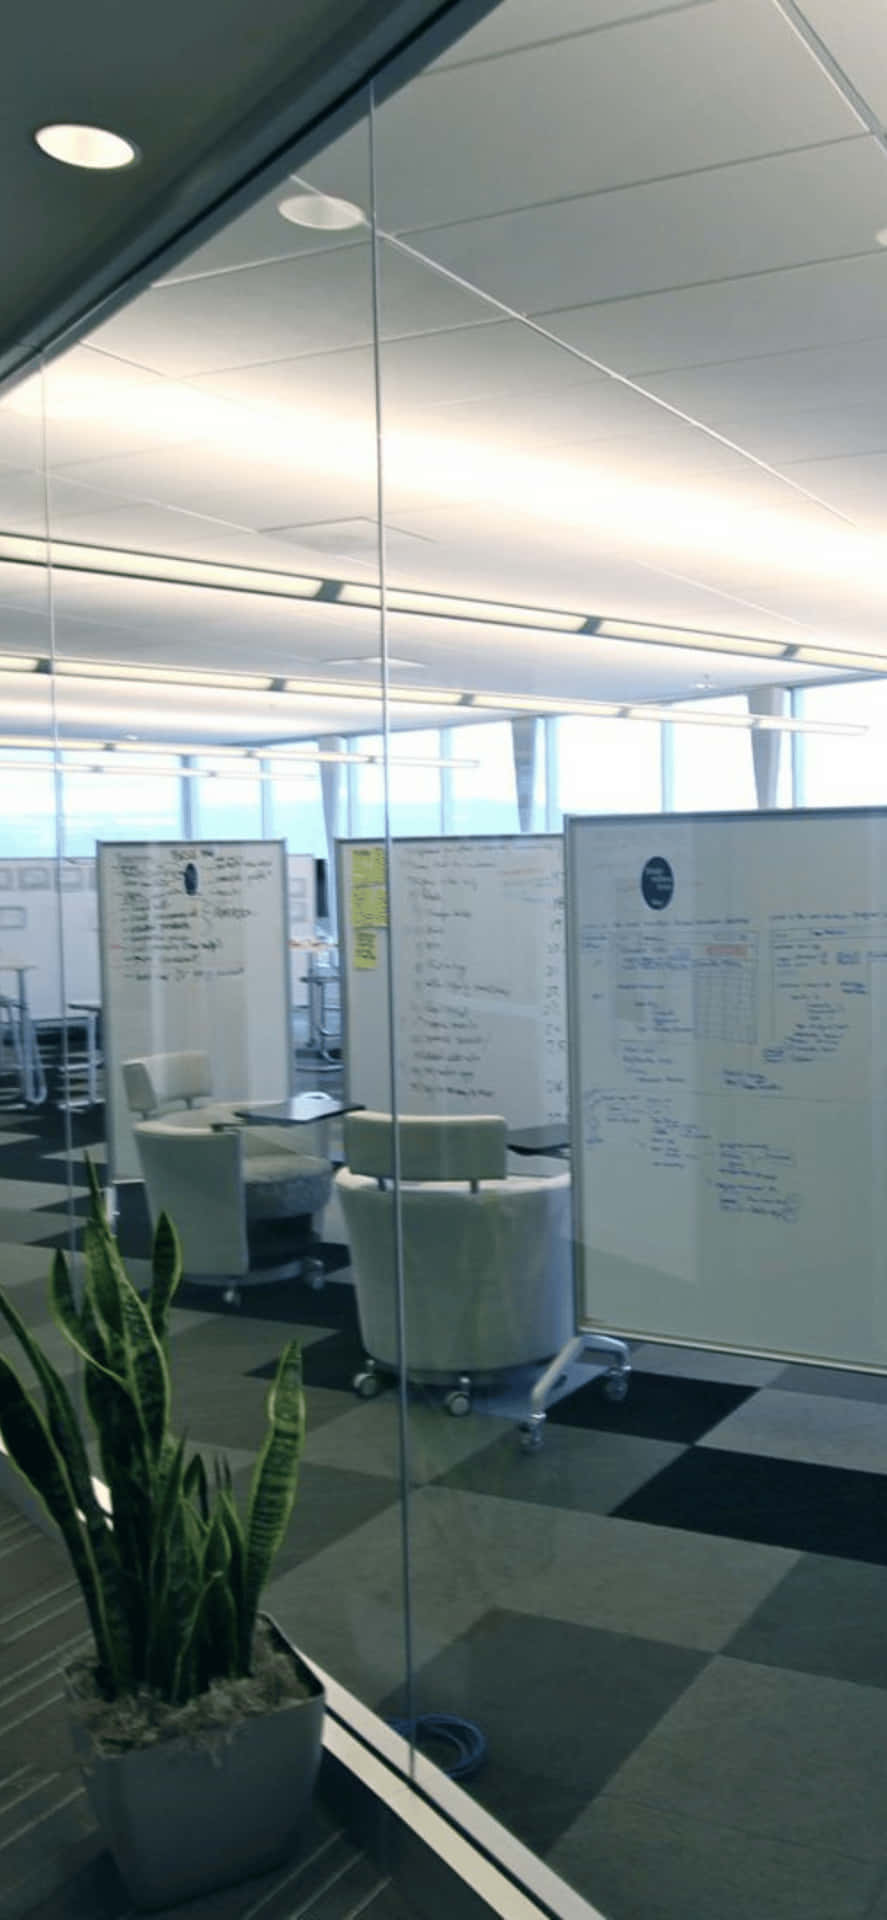 Whiteboard And Chairs iPhone X Office Background